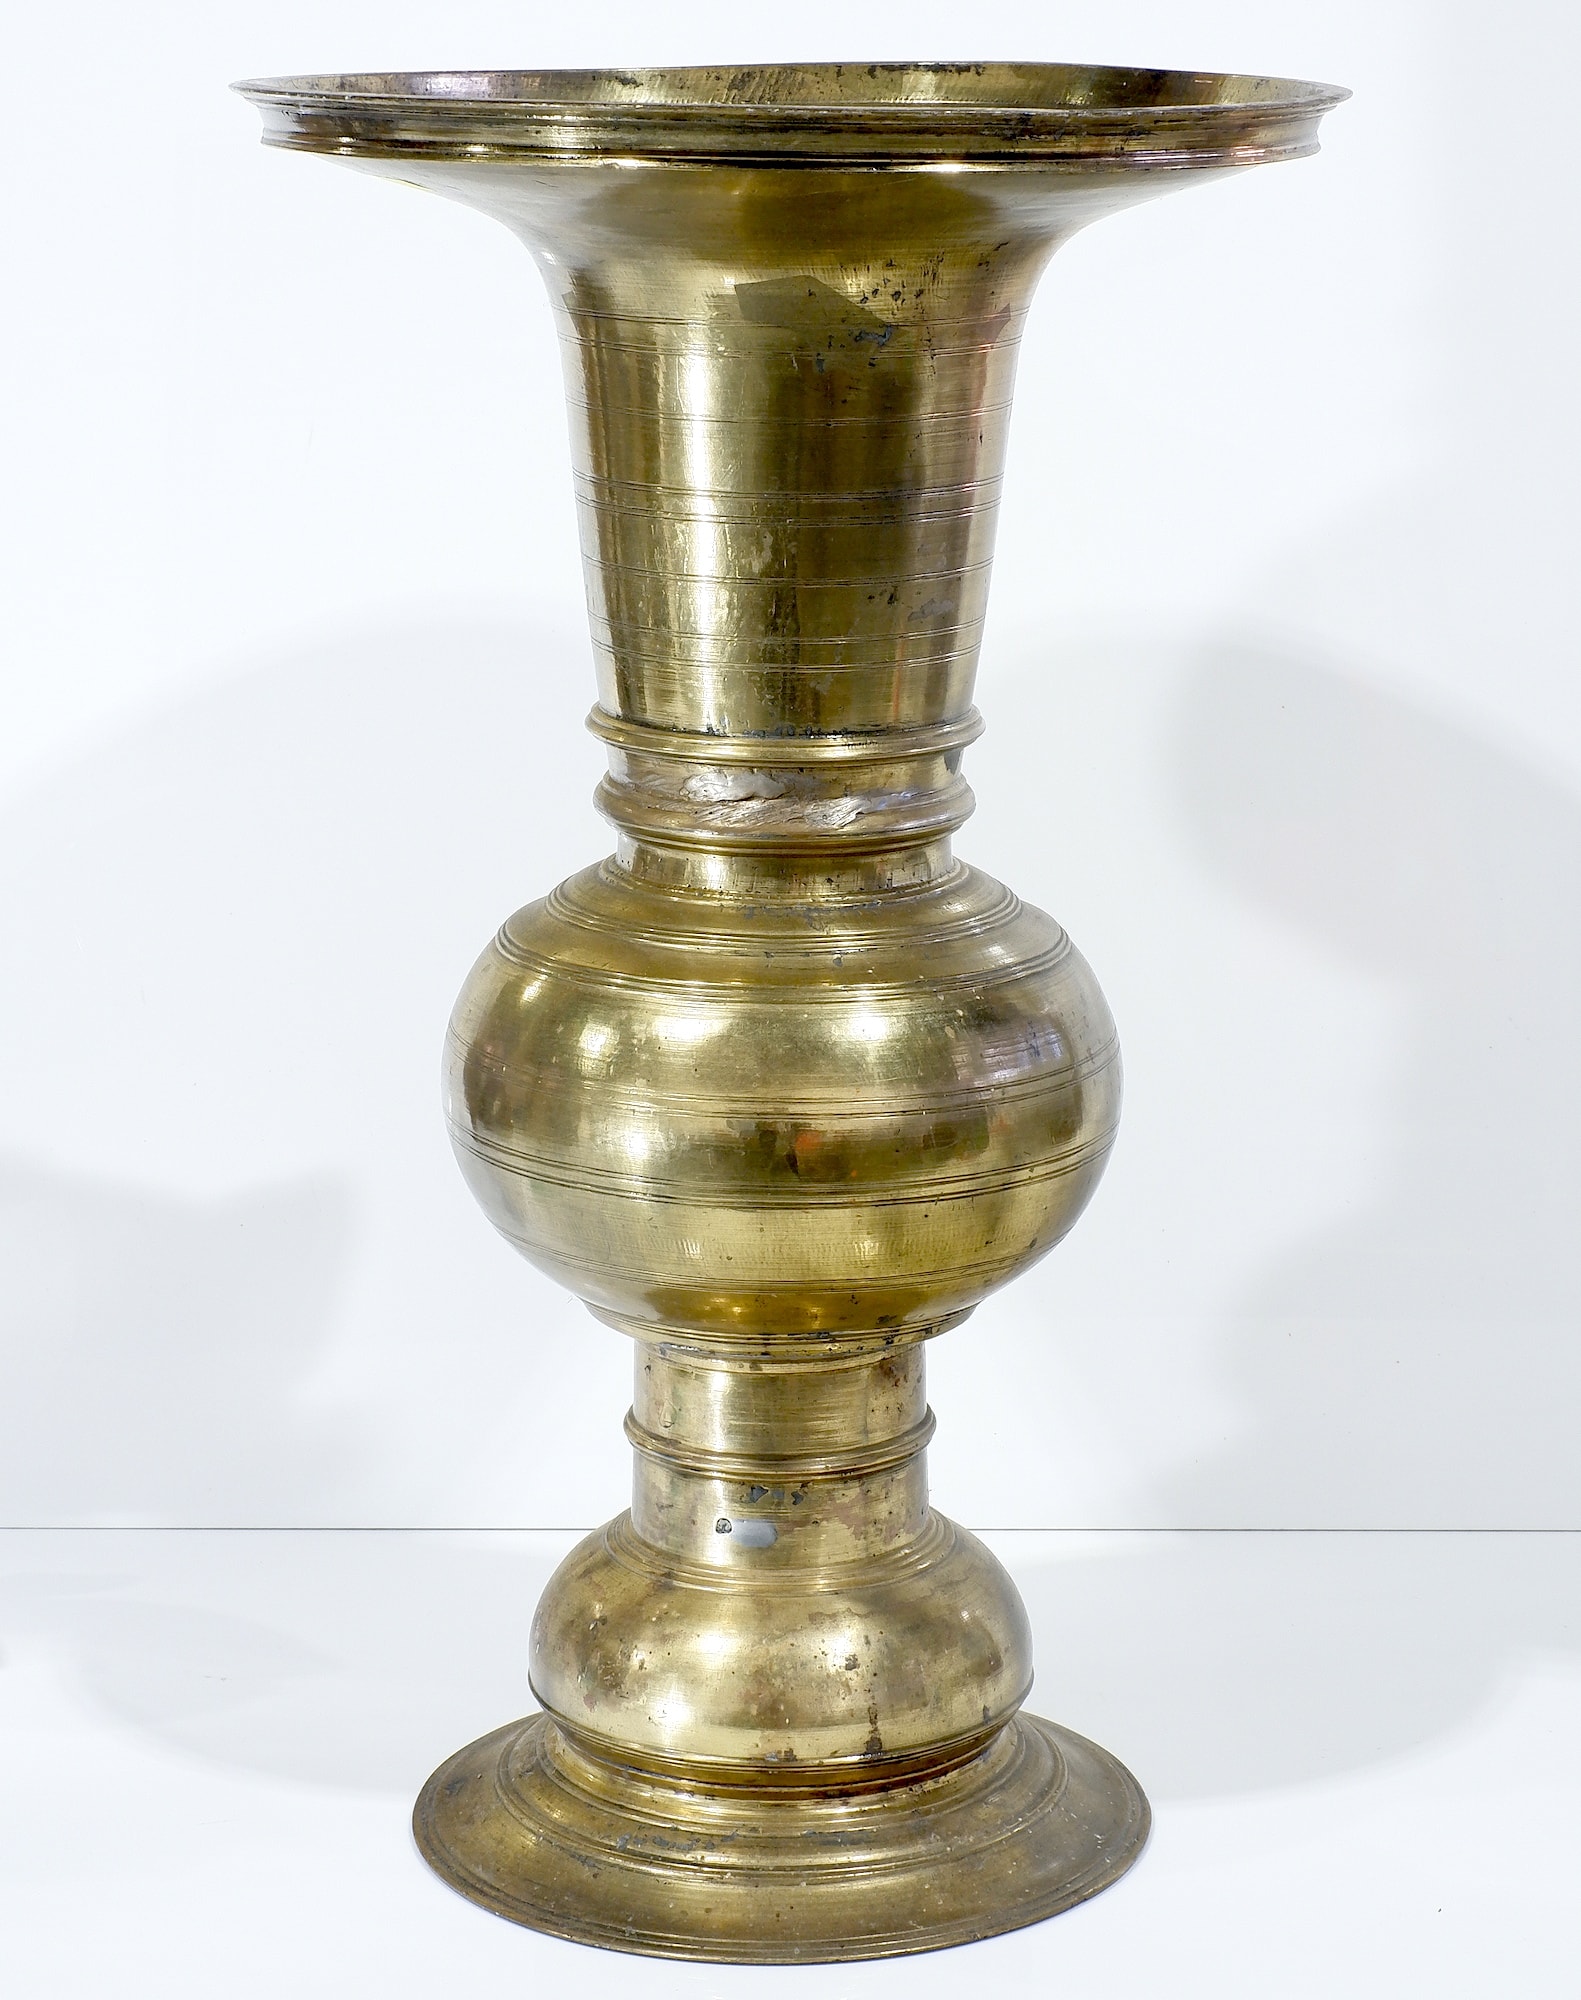 'Large Antique Indian Cast Brass Spittoon'